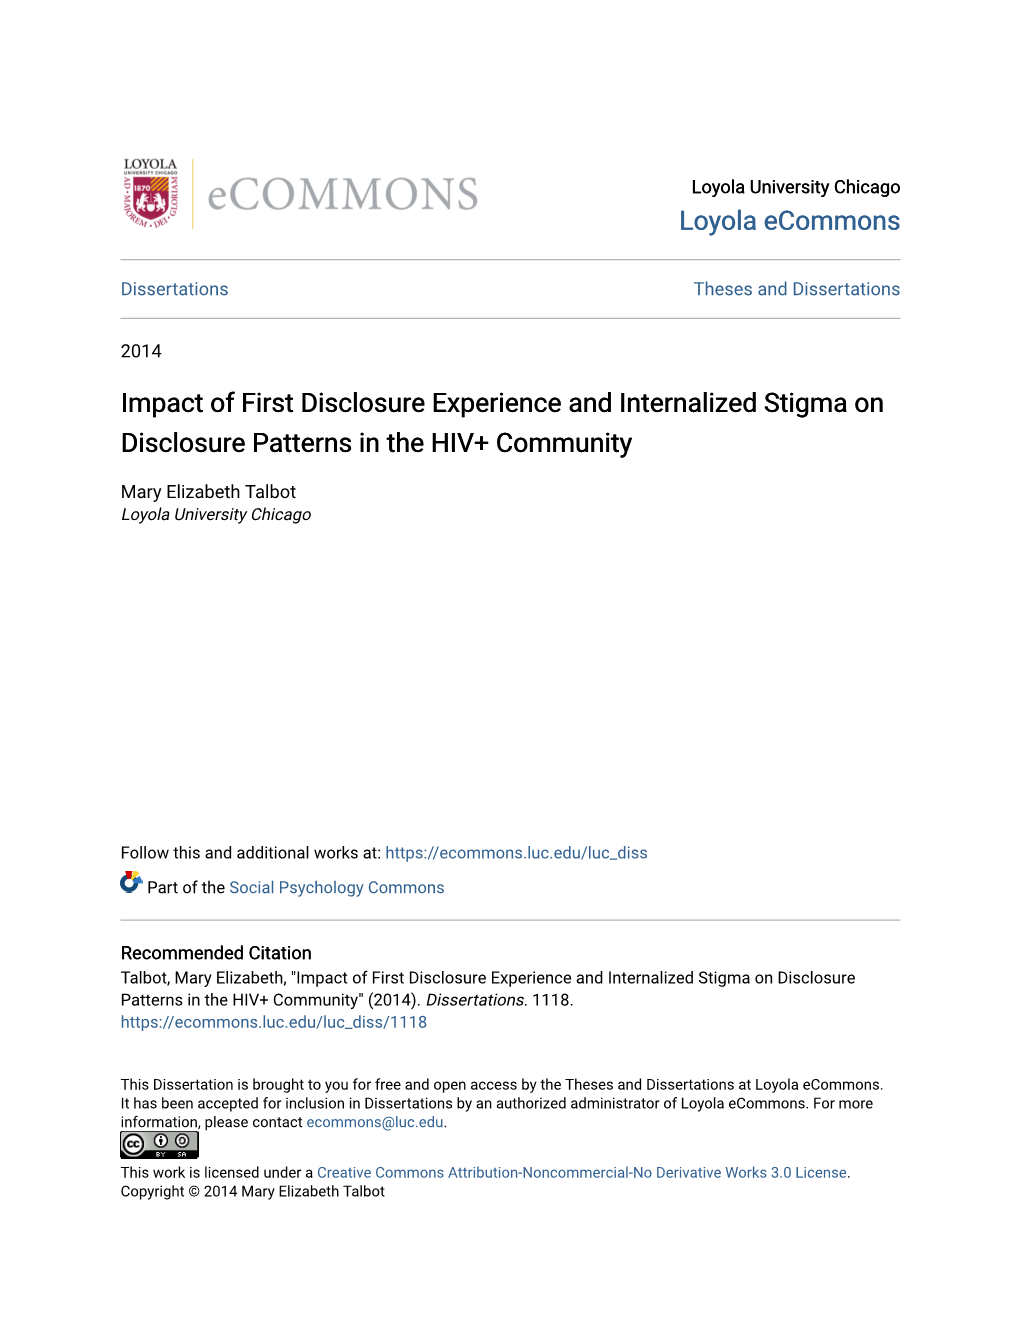 Impact of First Disclosure Experience and Internalized Stigma on Disclosure Patterns in the HIV+ Community